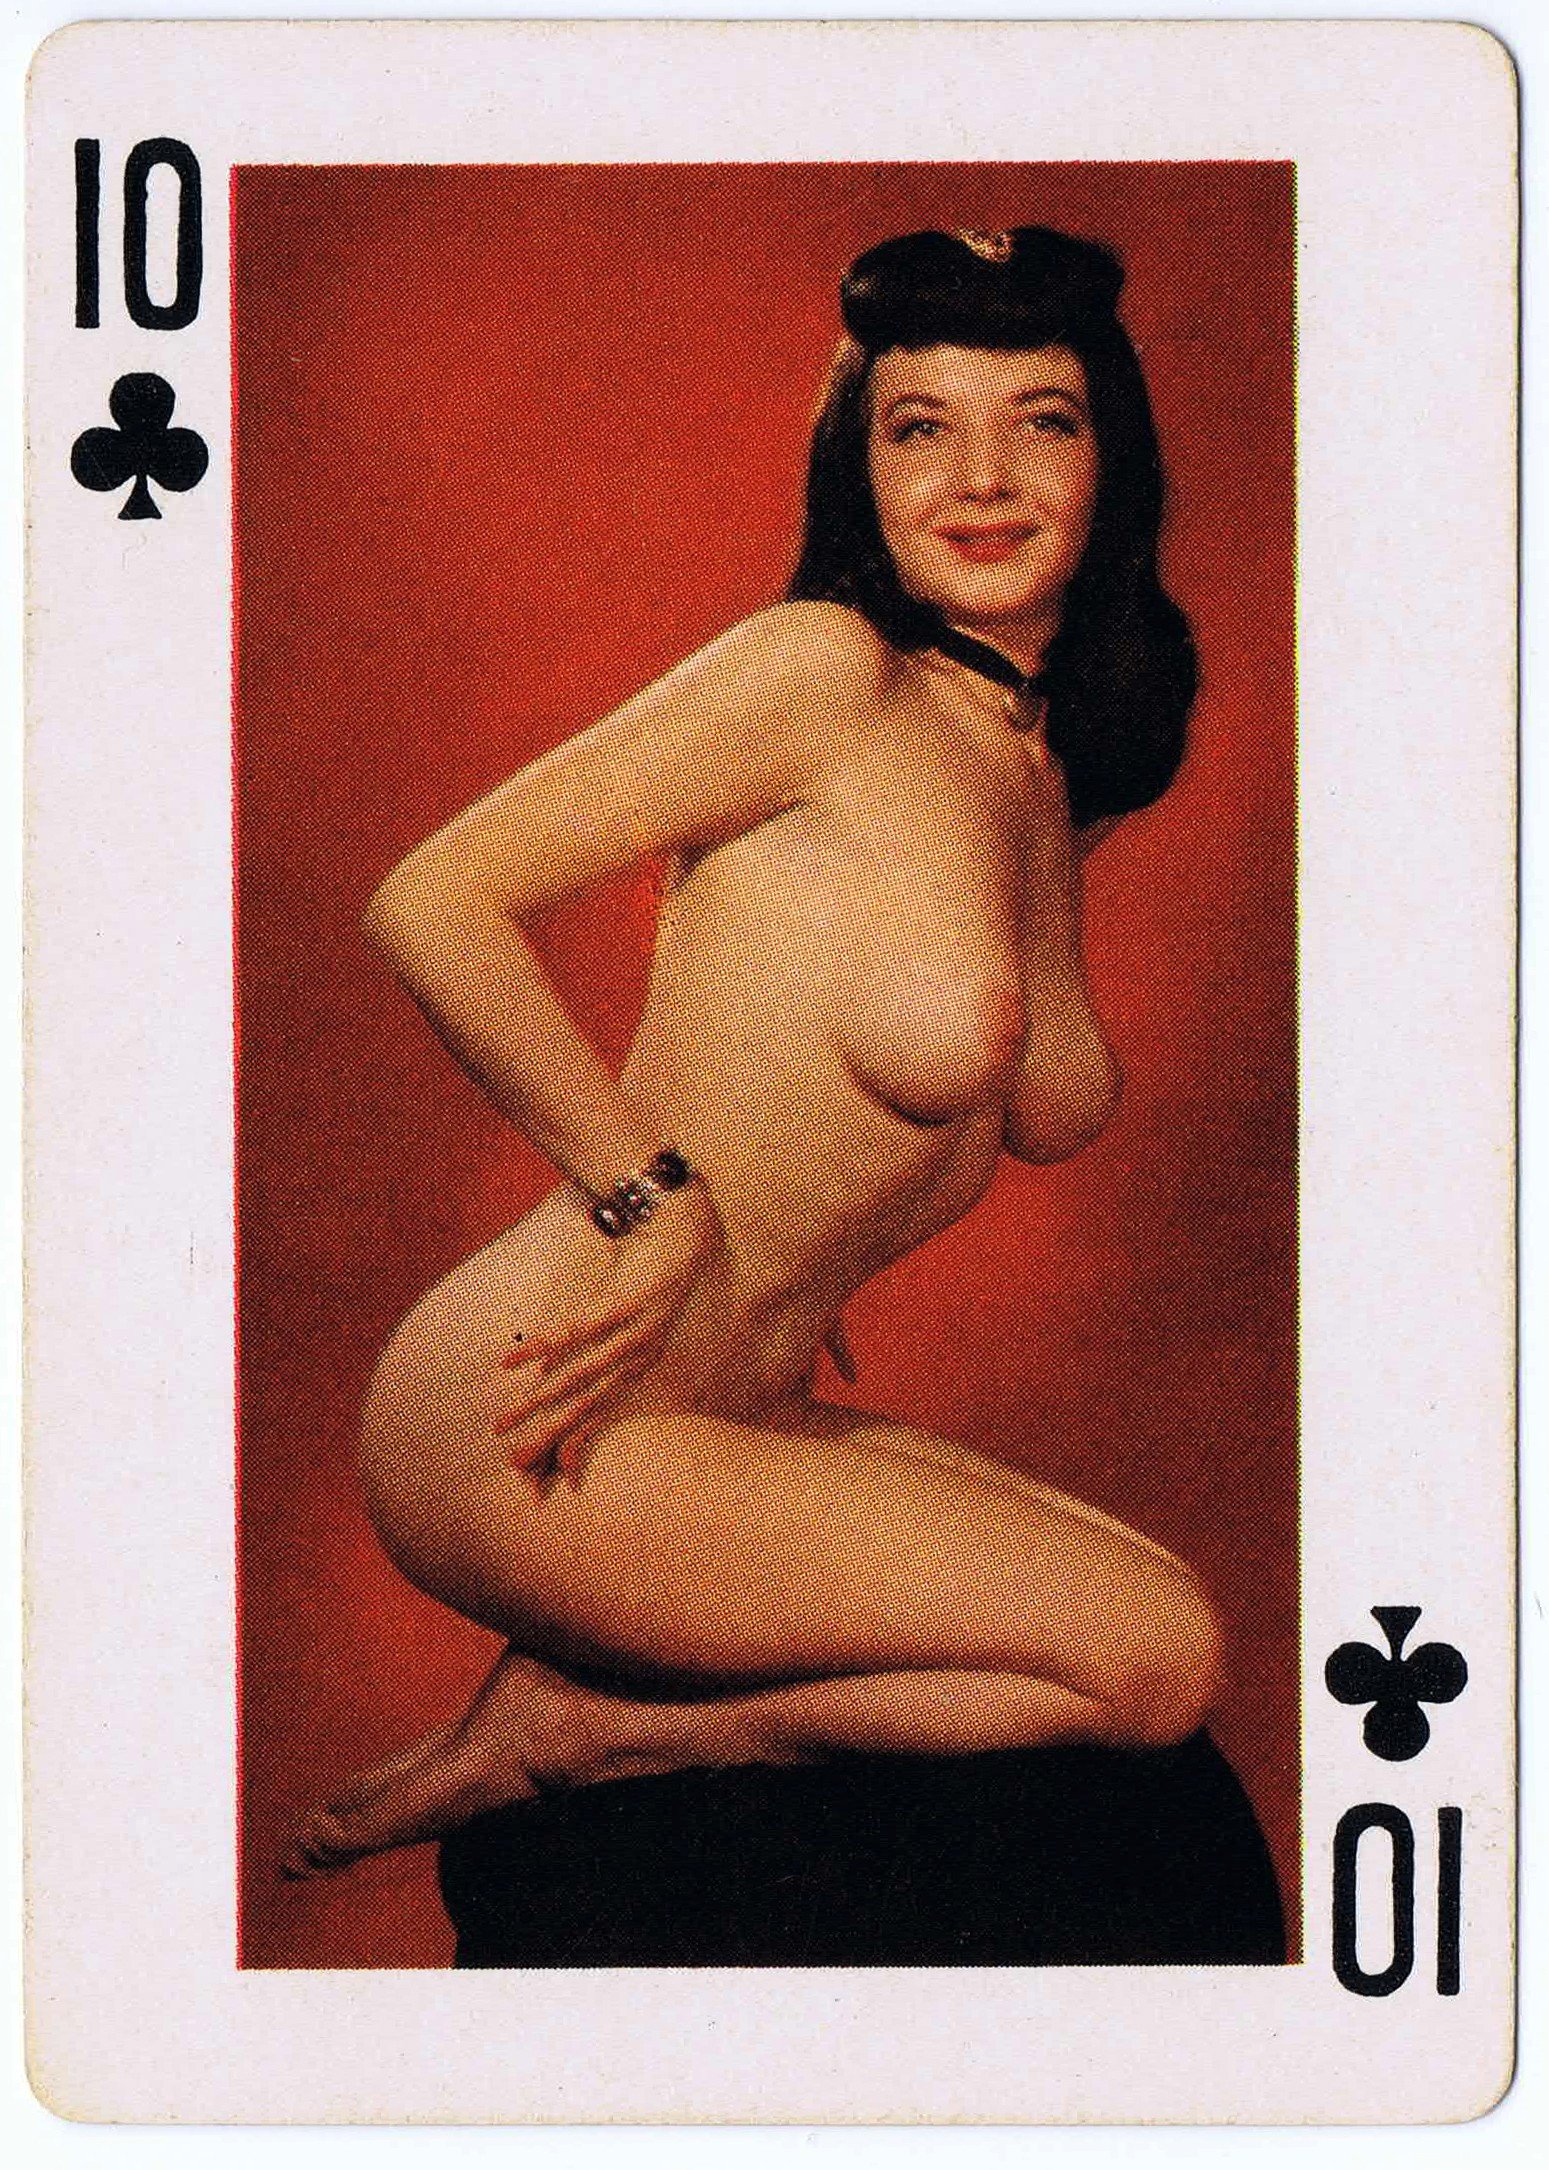 Photo by CRD Larson Art with the username @CRDLarson, who is a verified user,  September 5, 2019 at 9:05 PM. The post is about the topic Nude Playing Cards and the text says '#Ten of Clubs

From deck titled 'Fifty-Two Art Studies.' Made by the Novelties Manufacturing and Sales Corp, St. Louis, MO. Mid 1950s.

#photography #vintagenude #vintageerotica #1950s #retro #pinup #boudoir #burlesque #playingcards #glamour #stlouis..'